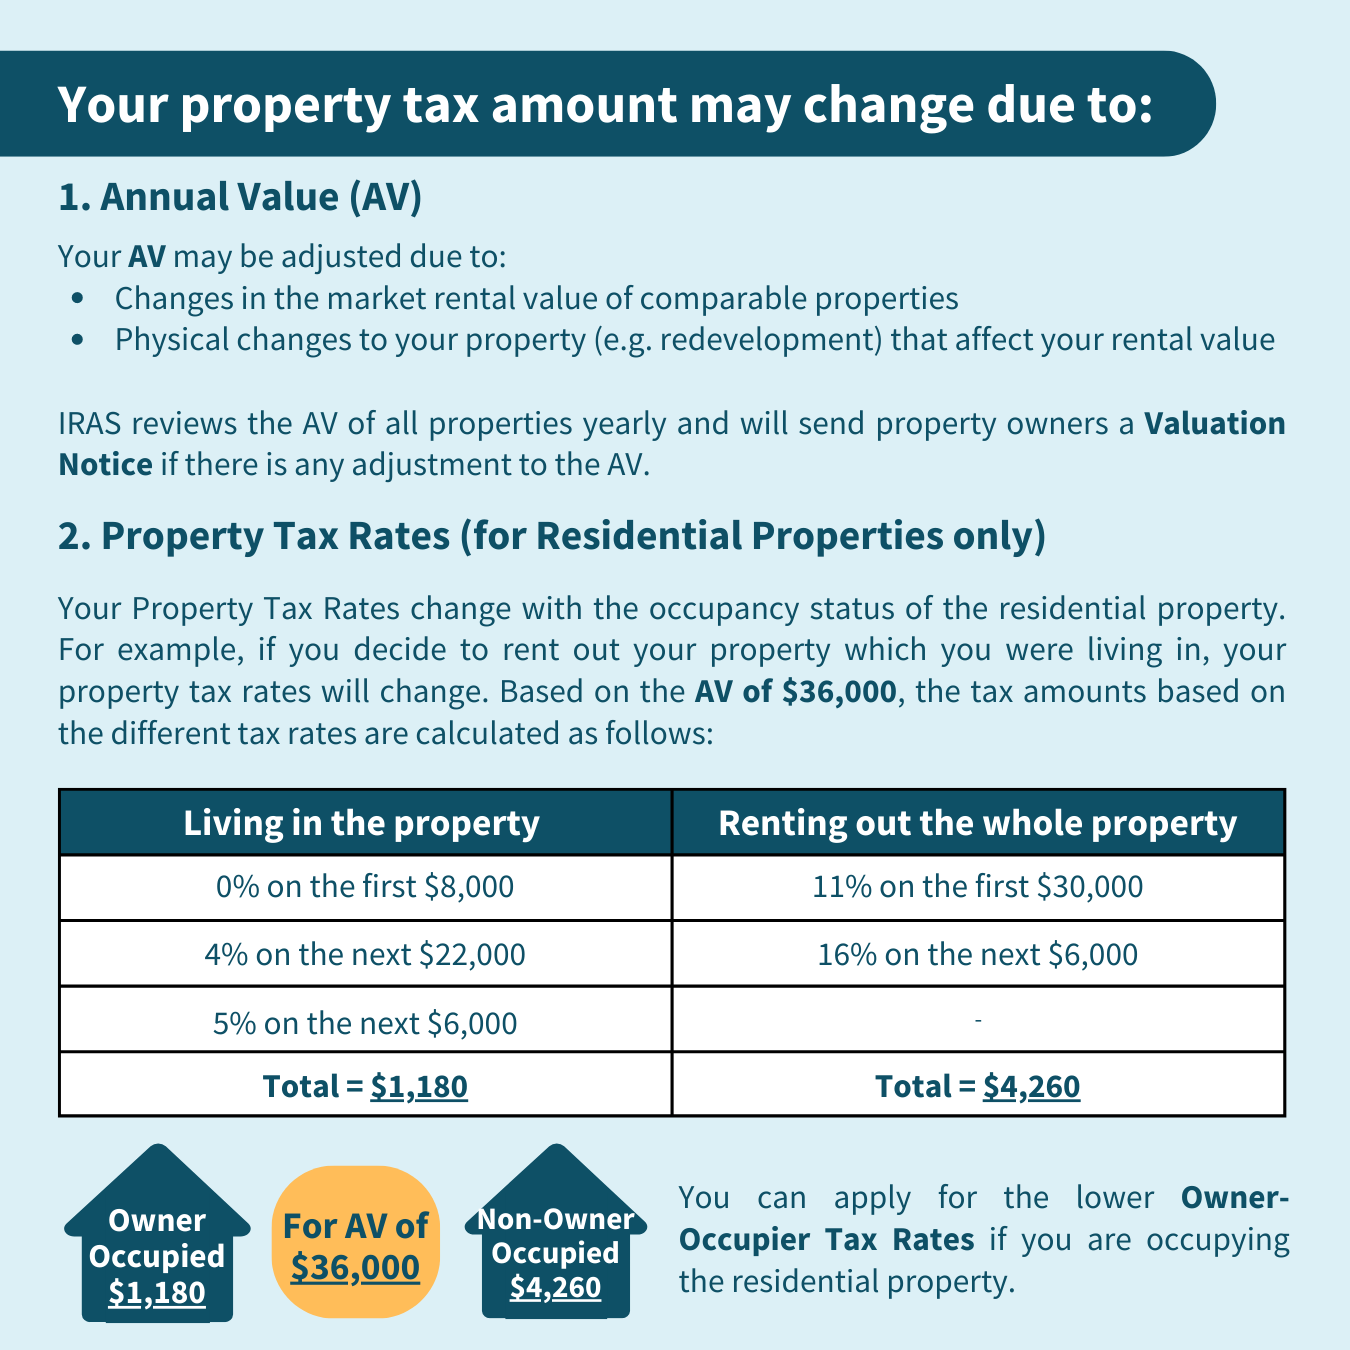 Your property tax amount may change due to changes in the Annual Value (AV) or Property Tax Rates (for residential properties only).